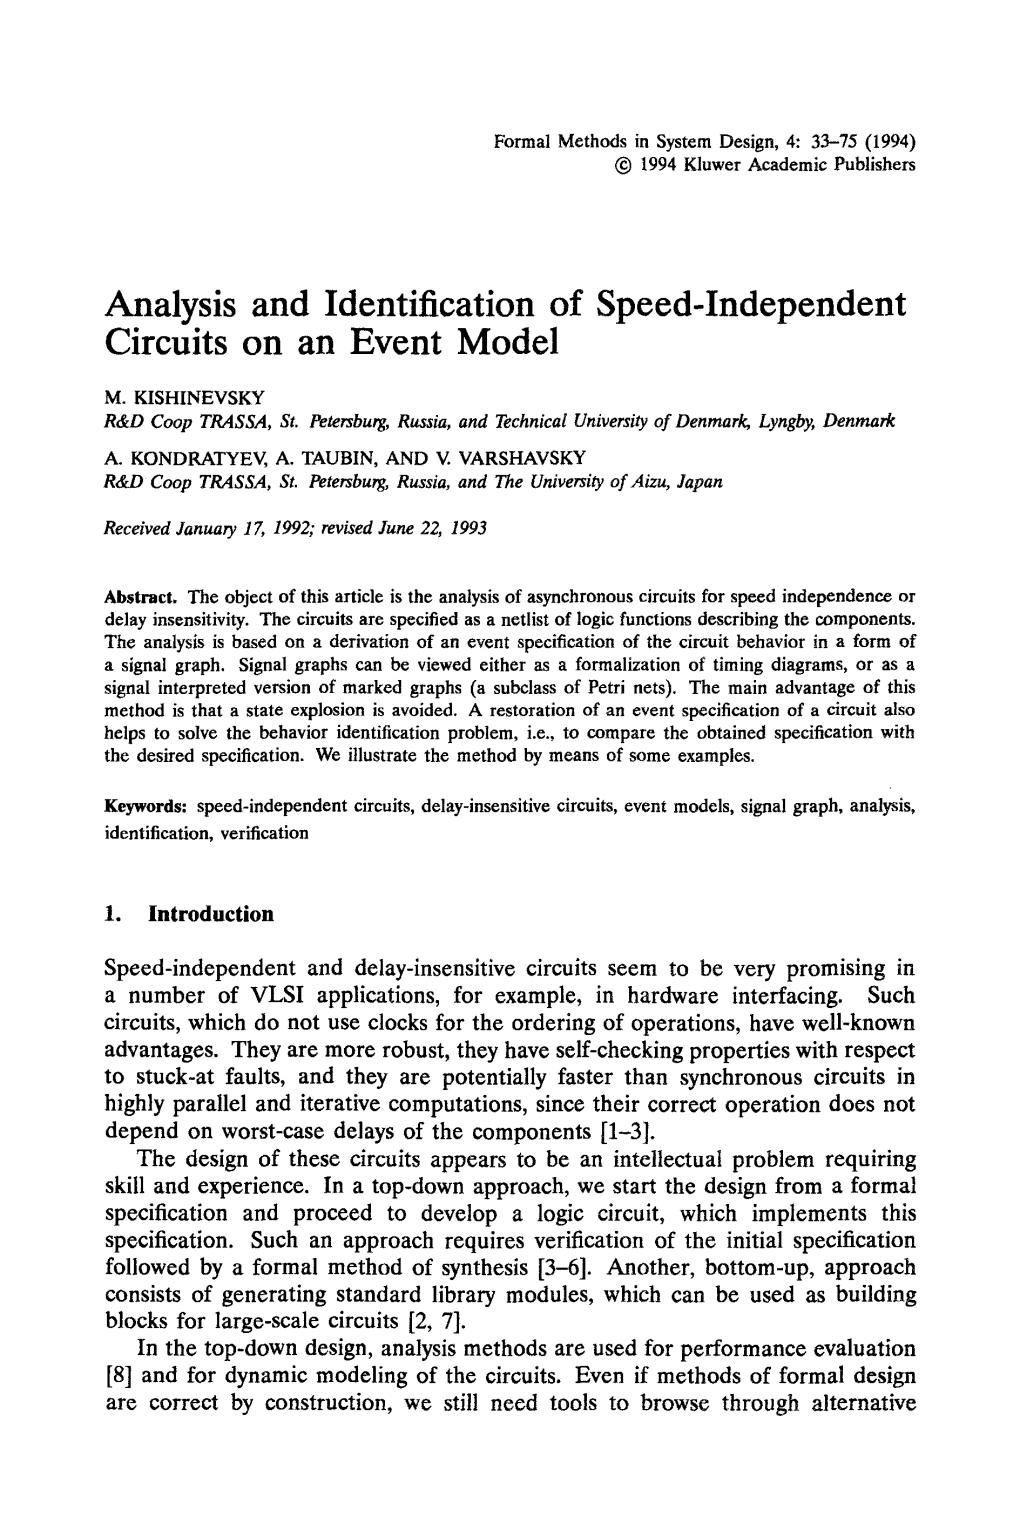 Analysis and Identification of Speed-Independent Circuits on an Event Model